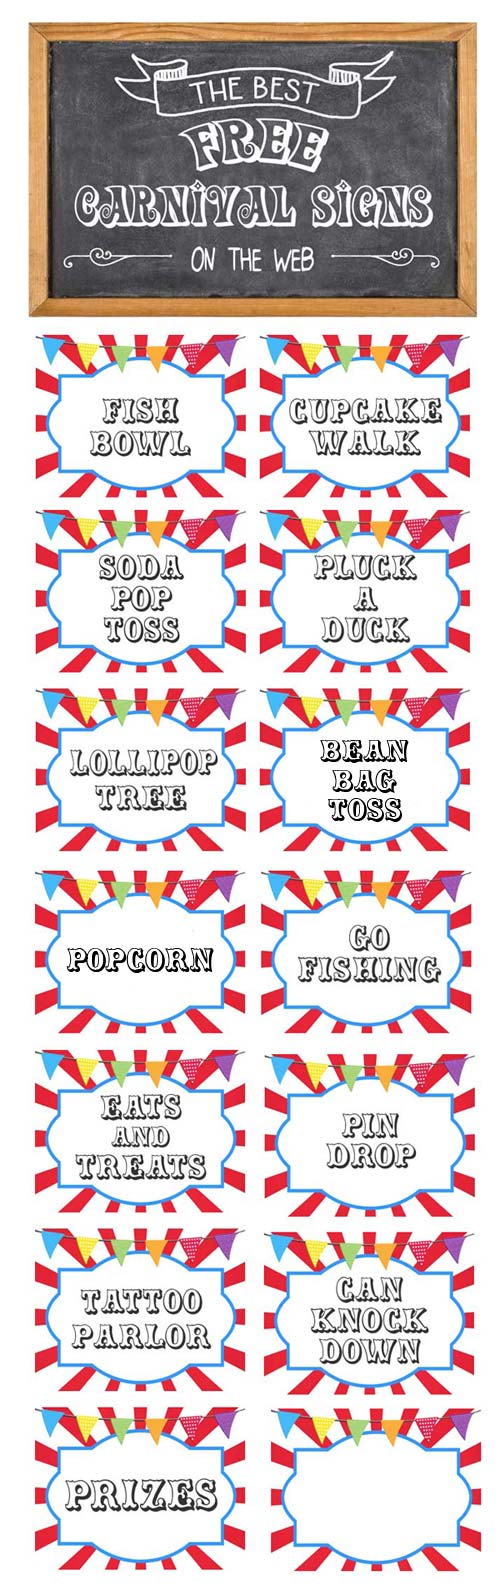 printable-carnival-signs-free-festive-signage-for-games-tickets